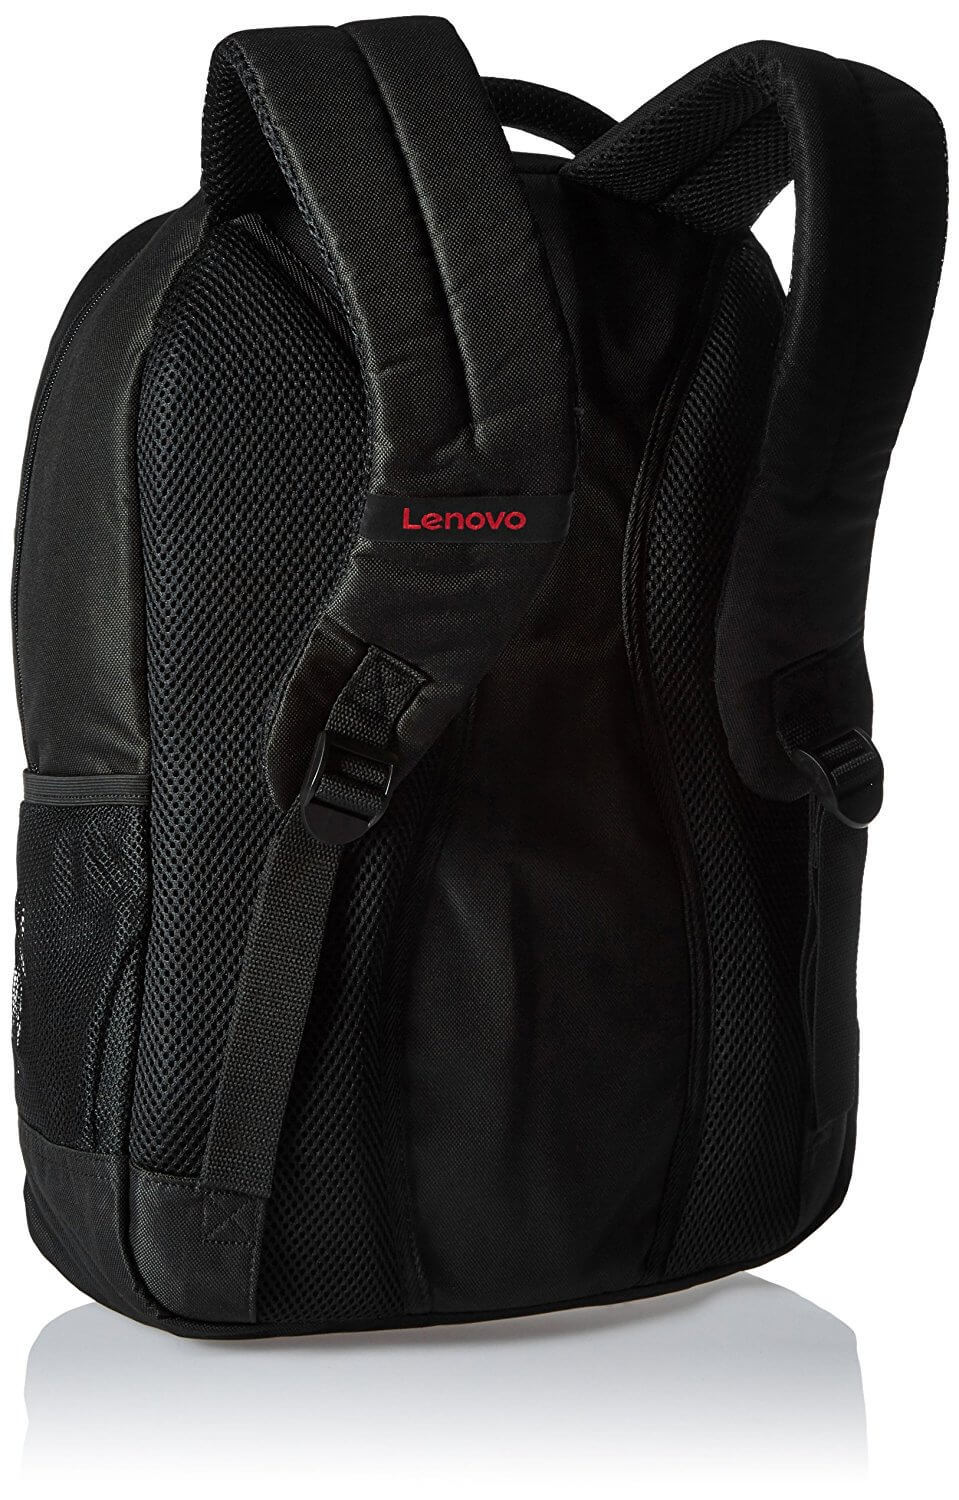 product.php?id=Lenovo Laptop Bag 15.6 inch backpack Black Red